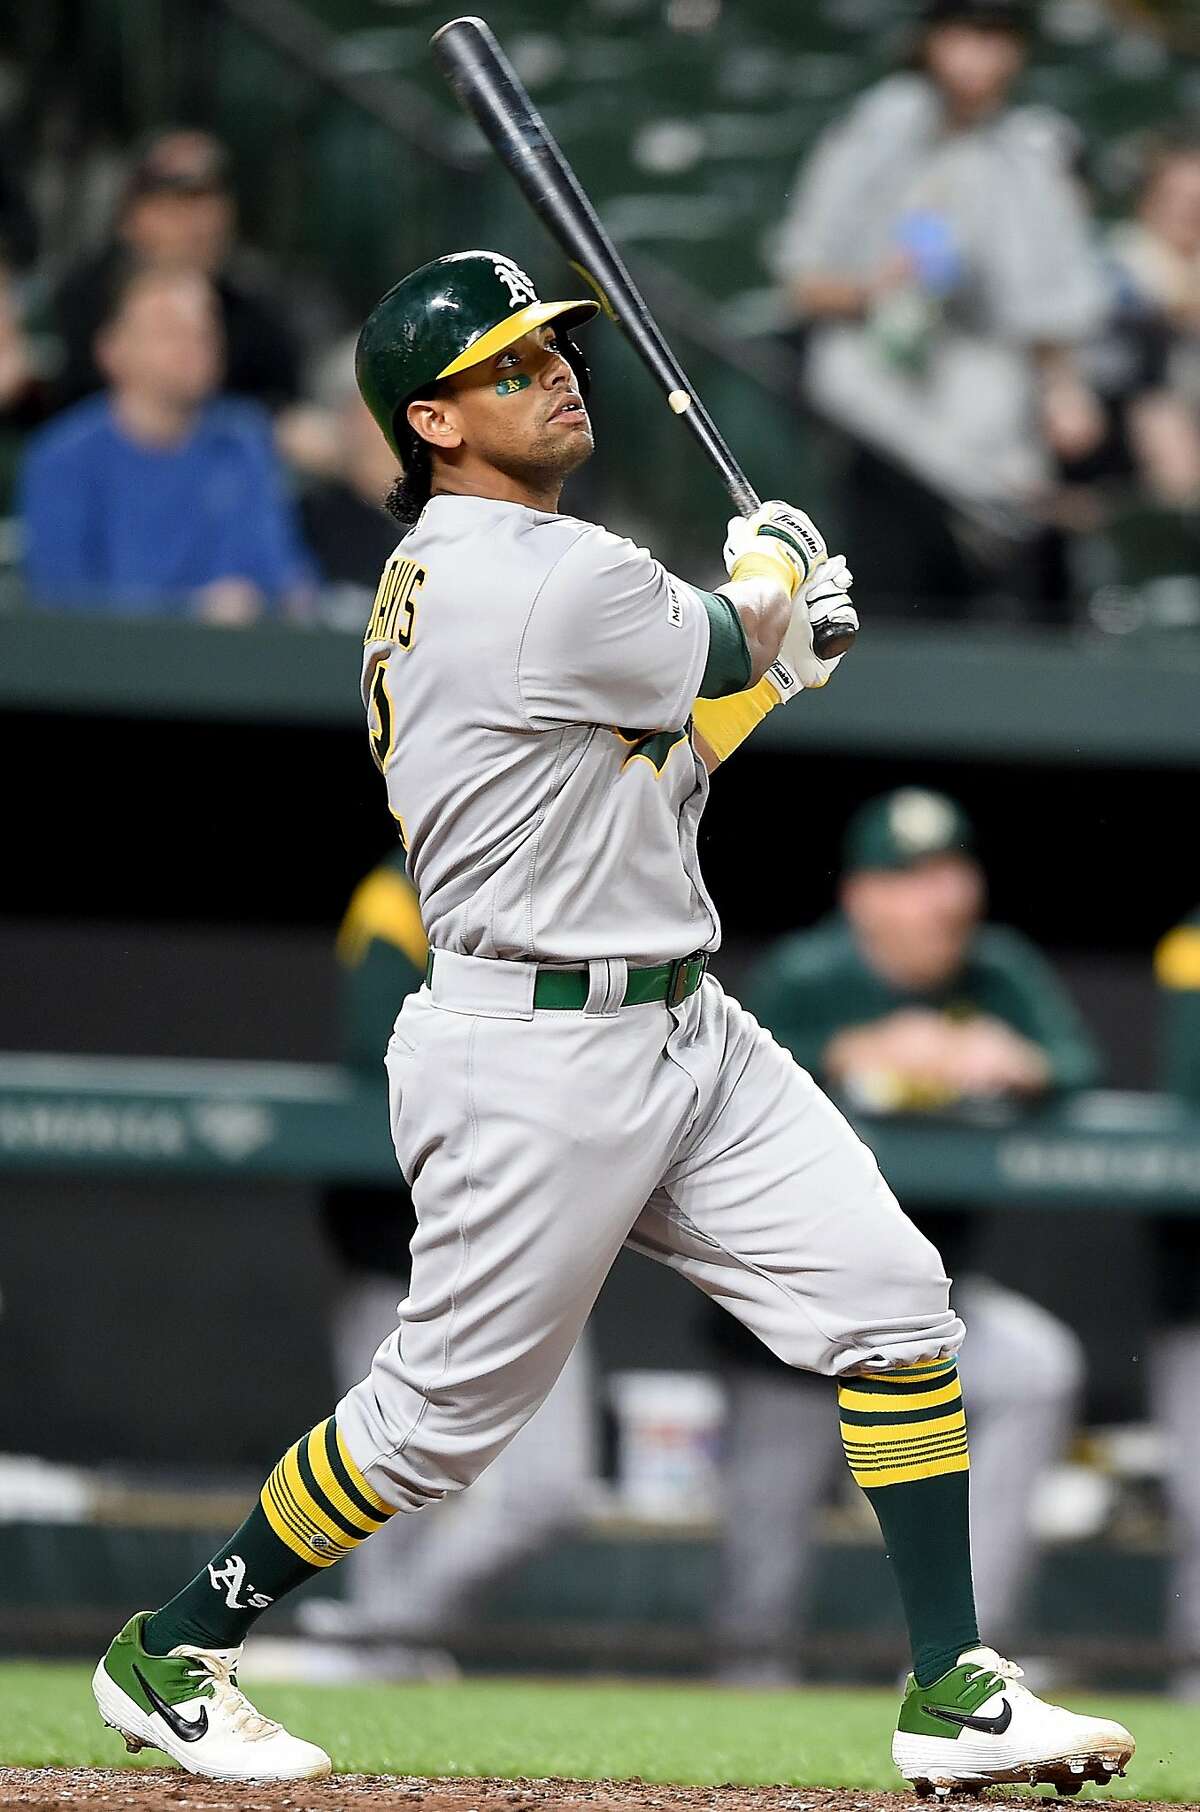 BALTIMORE, MD - APRIL 10: Khris Davis #2 of the Oakland Athletics hits a home run in the seventh inning against the Baltimore Orioles at Oriole Park at Camden Yards on April 10, 2019 in Baltimore, Maryland. (Photo by Greg Fiume/Getty Images)